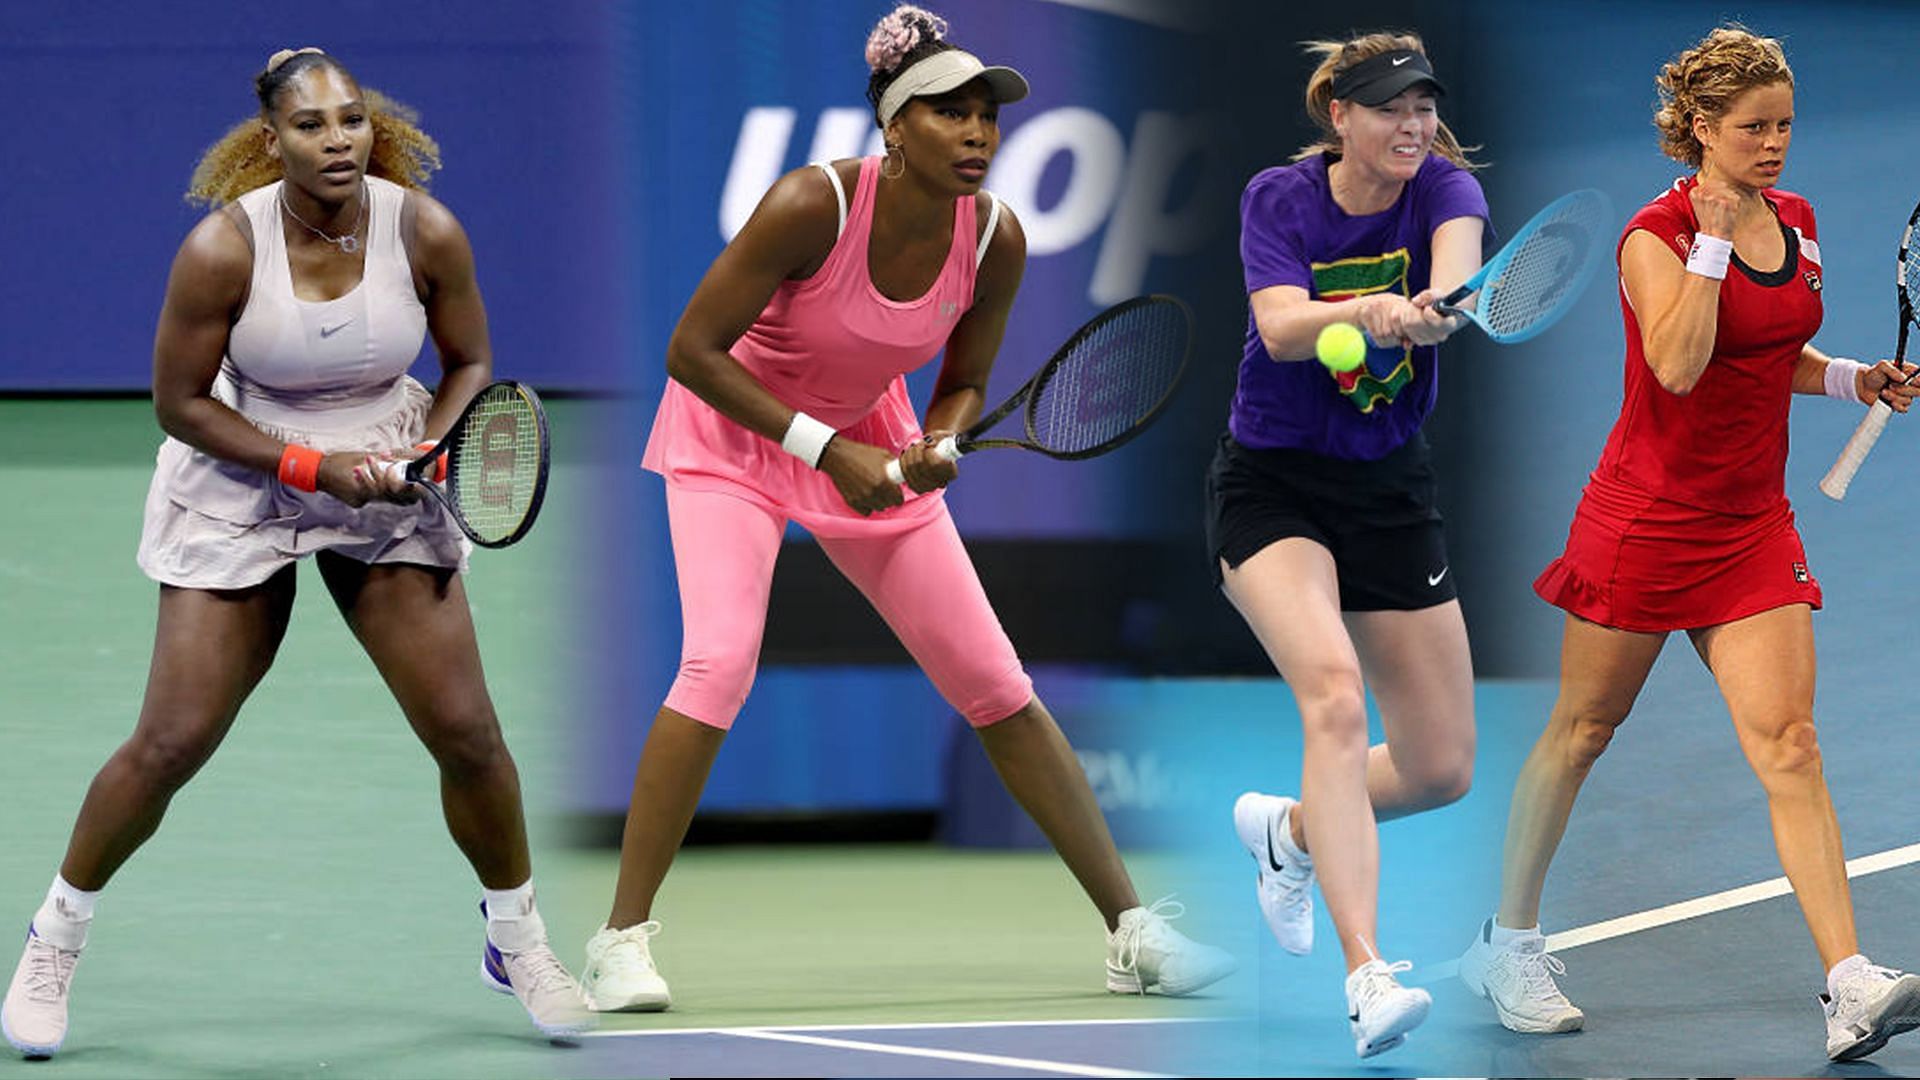 The first two decades of the current century has seen some fine female tennis players